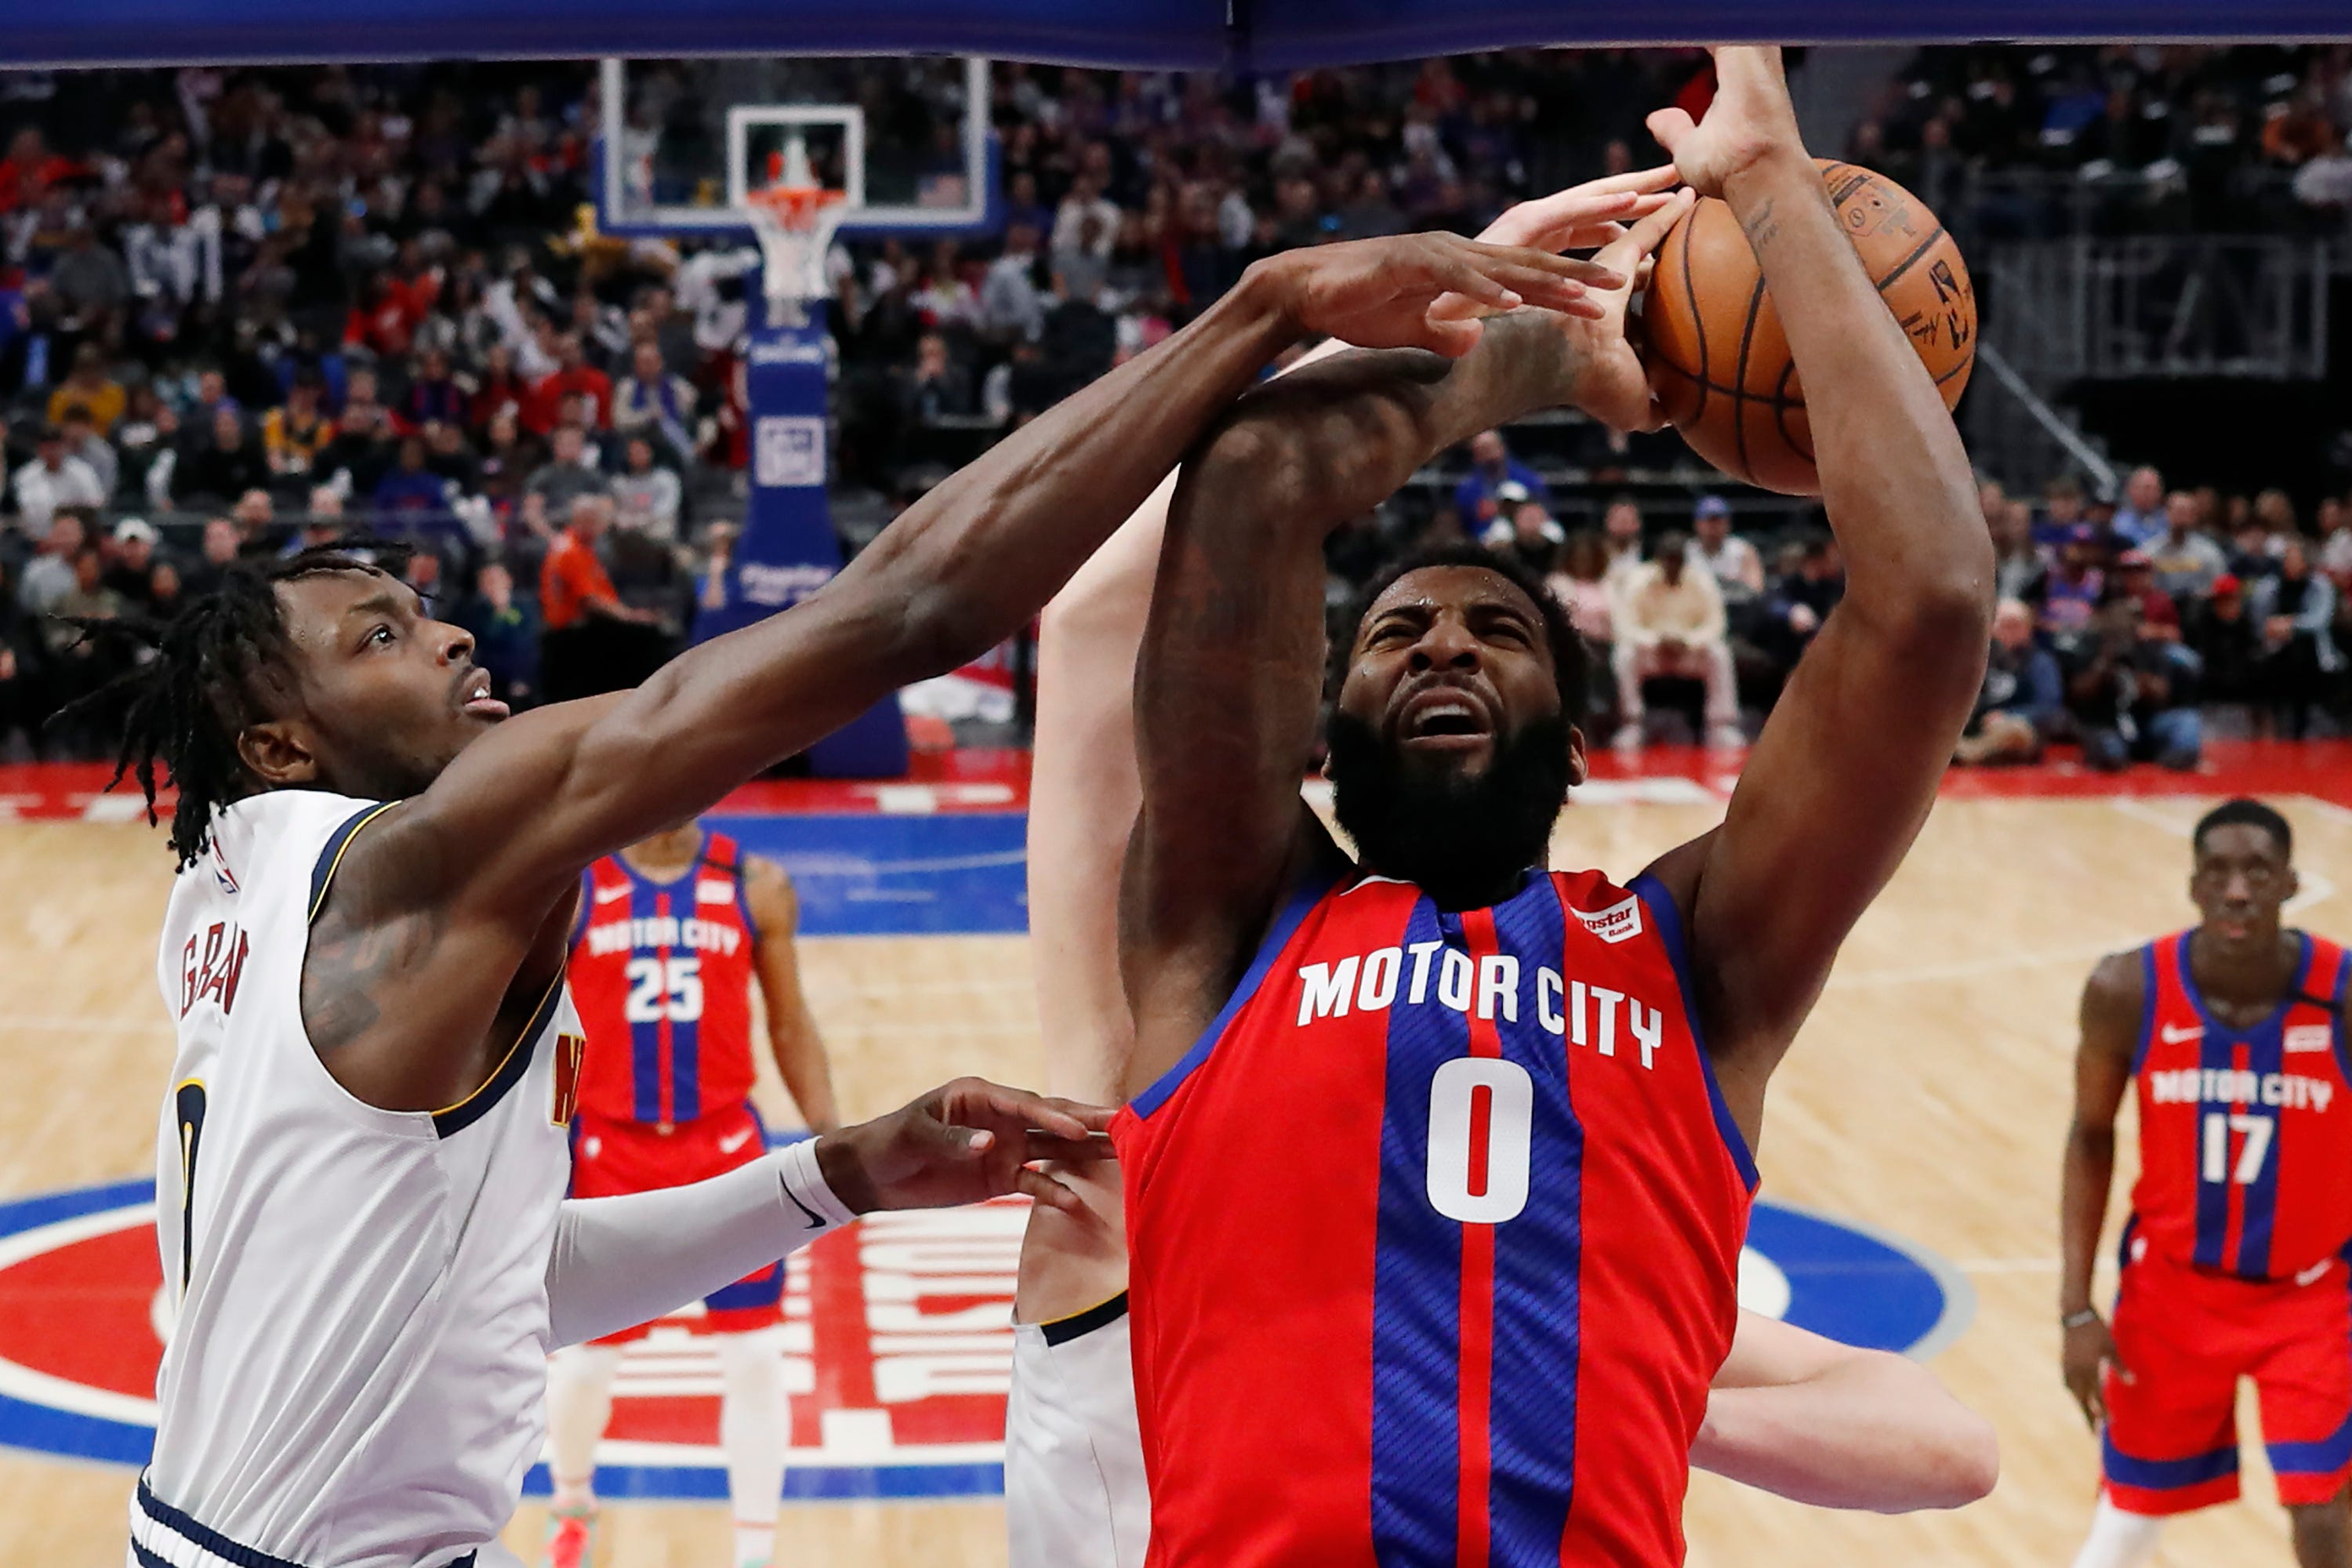 Denver Nuggets forward Jerami Grant, left, reaches in as teammate center Nikola Jokic knocks the ball away from Detroit Pistons center Andre Drummond (0) during the first half.